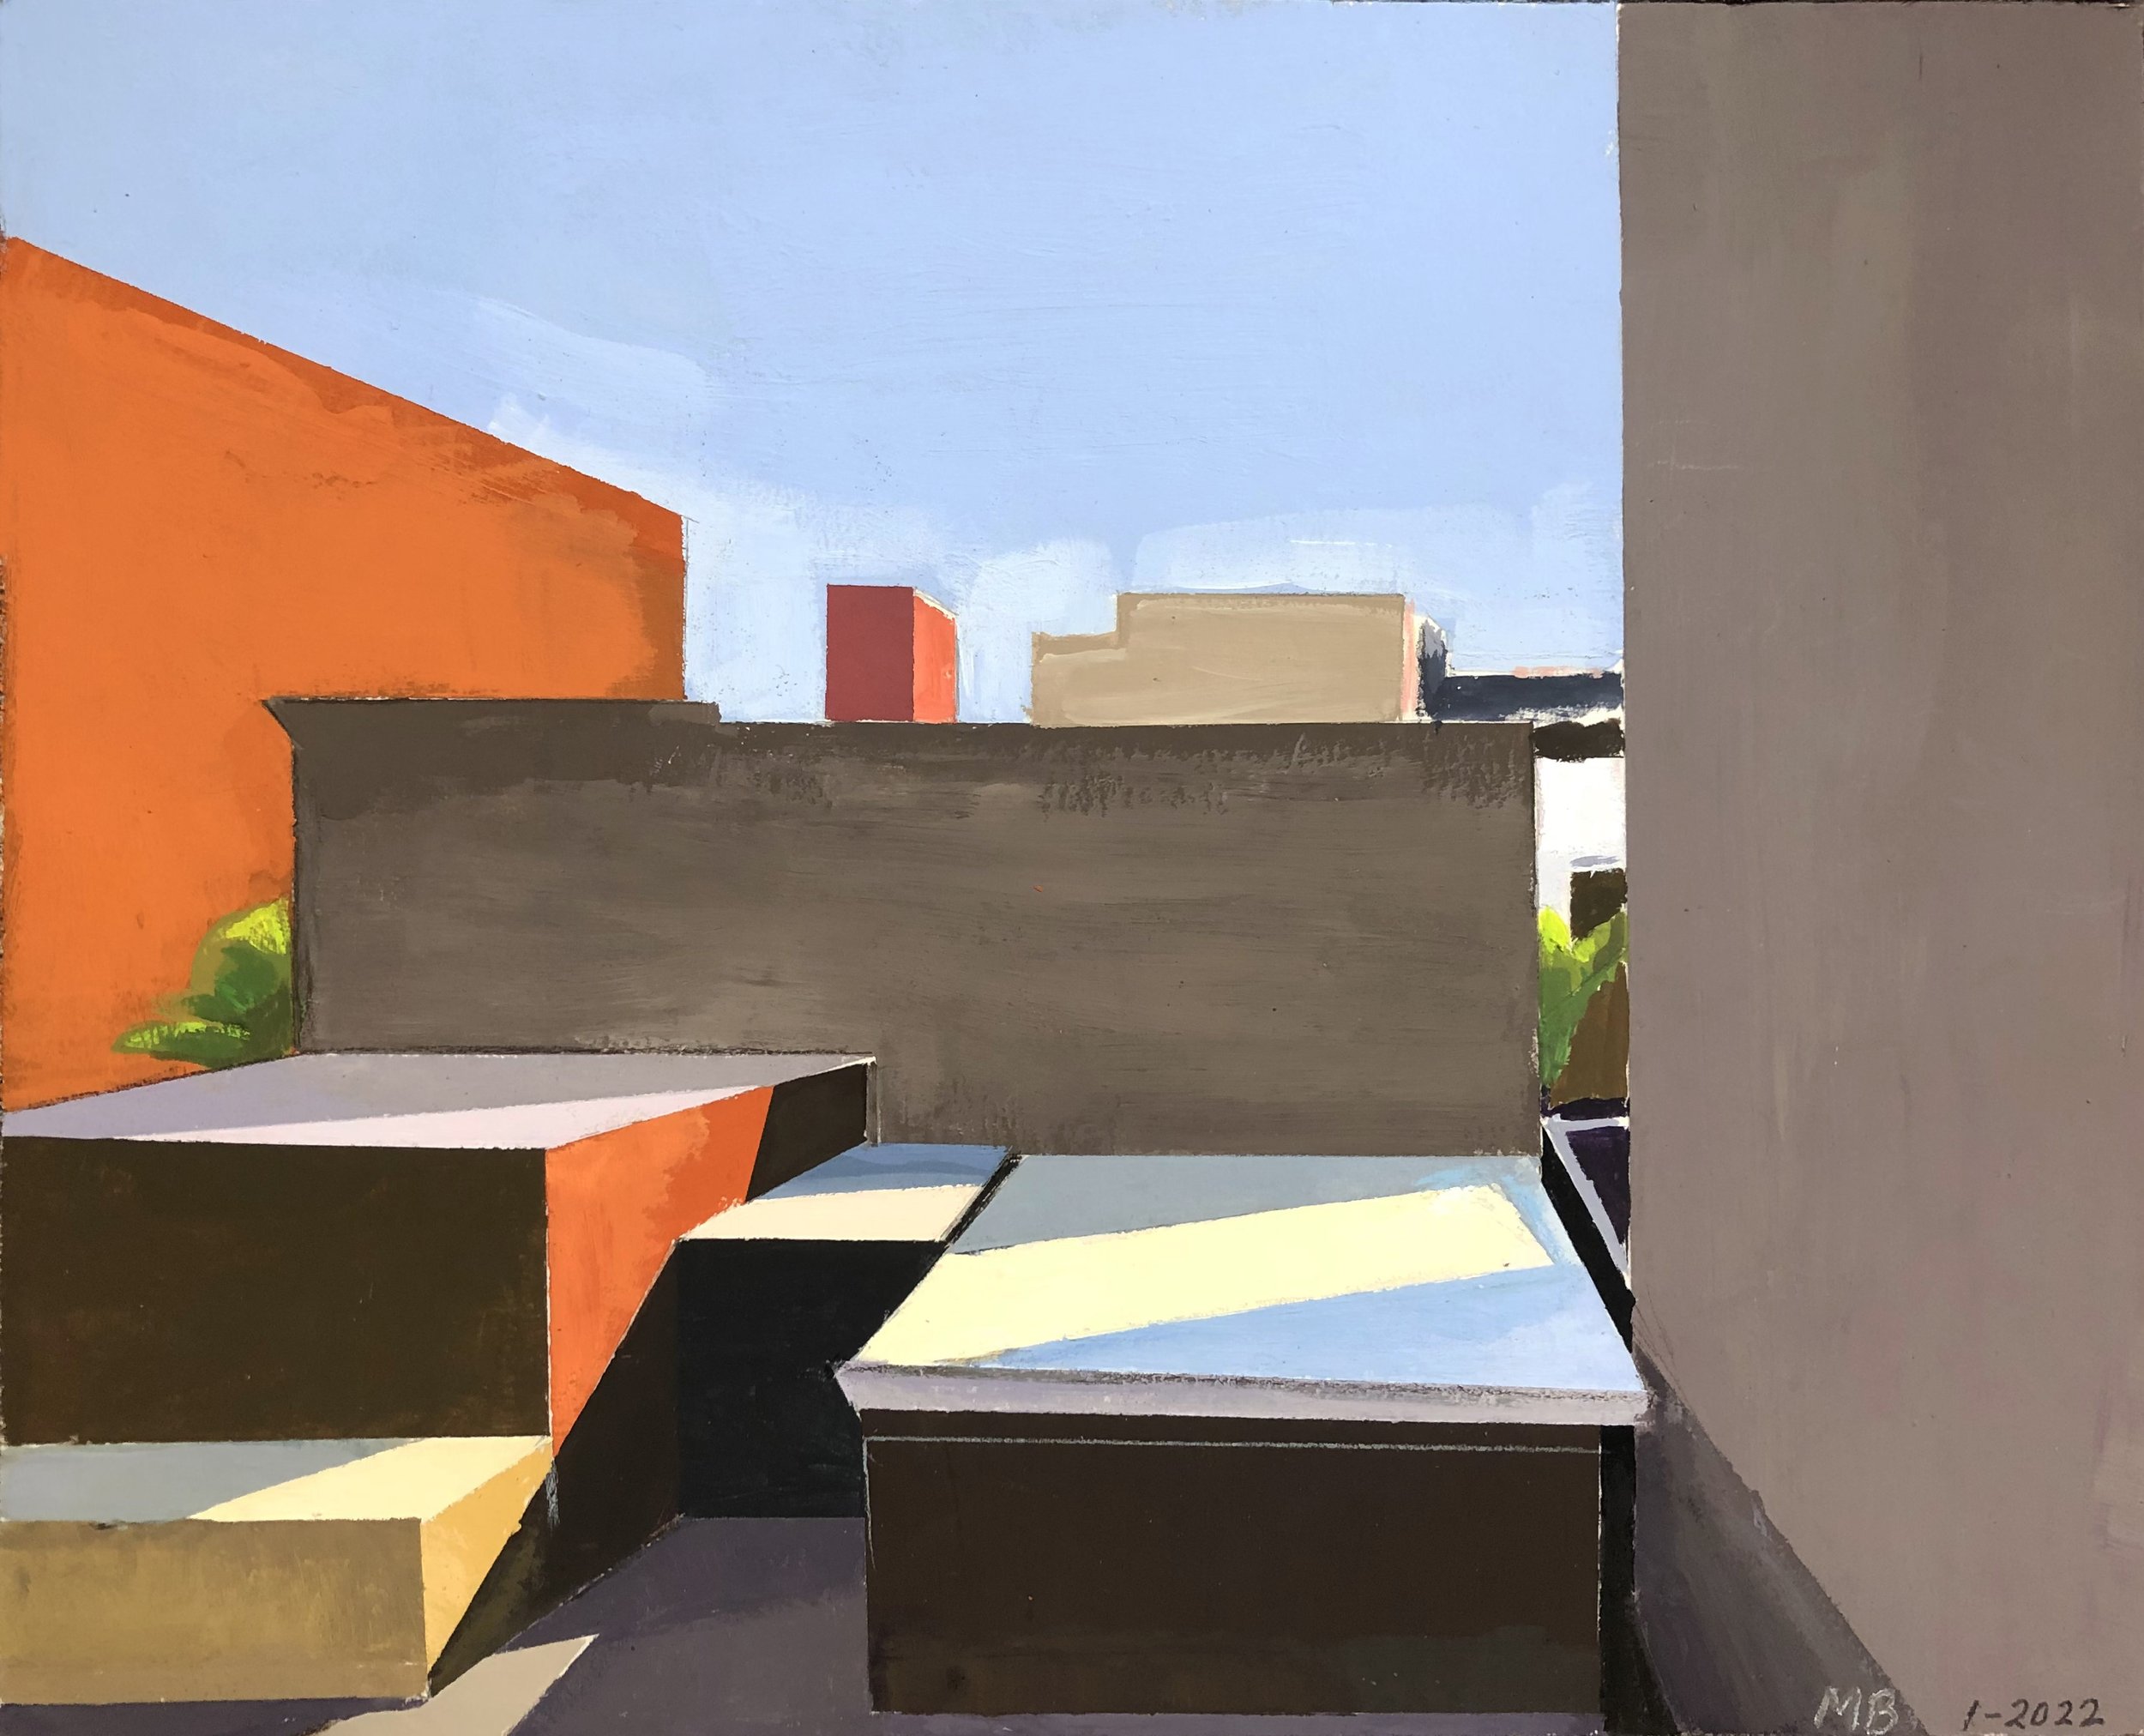    East Harlem Rooftops from the Train II,   gouache,                                      8 5/8 x 10 5/8 in, 2022   